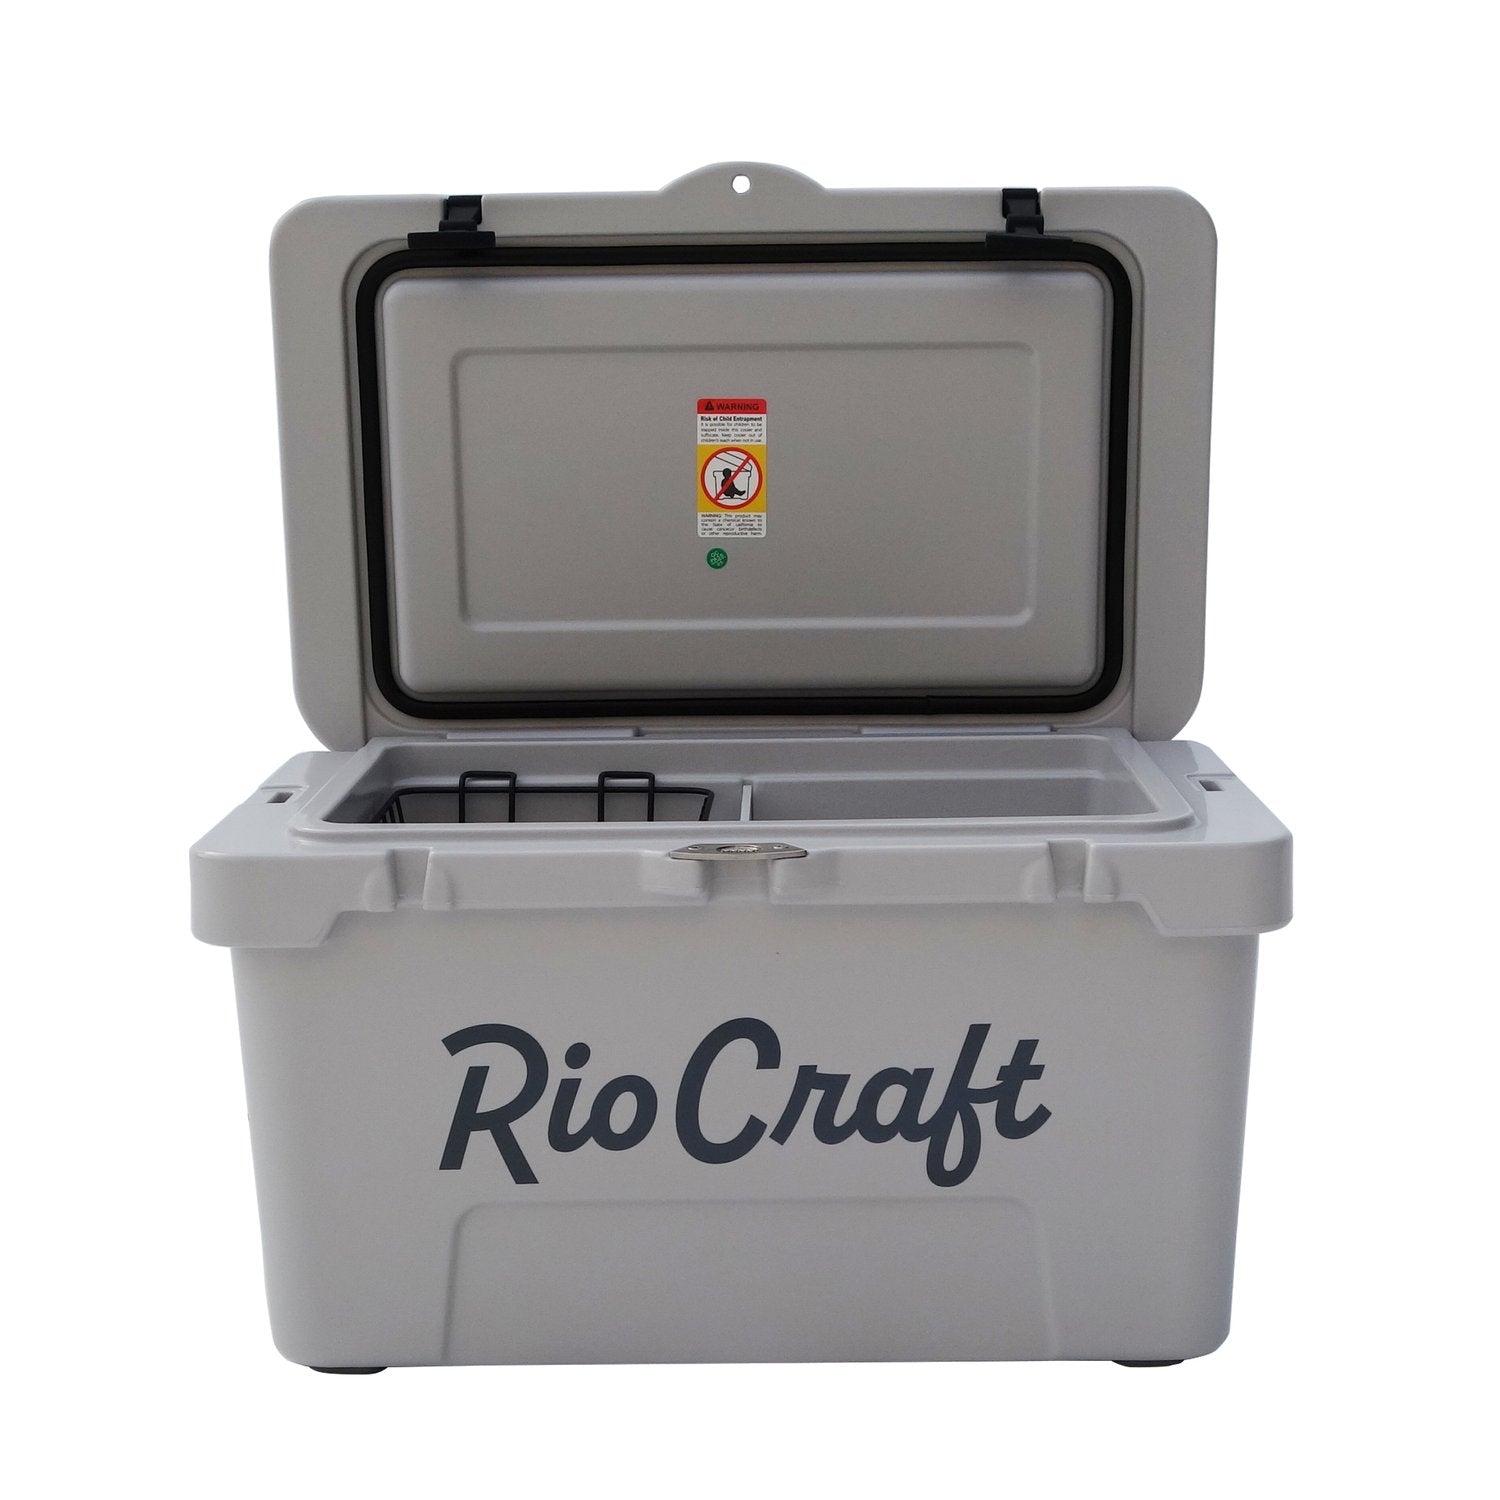 A durable Rio Coolers with the brand name Rio Craft on it.